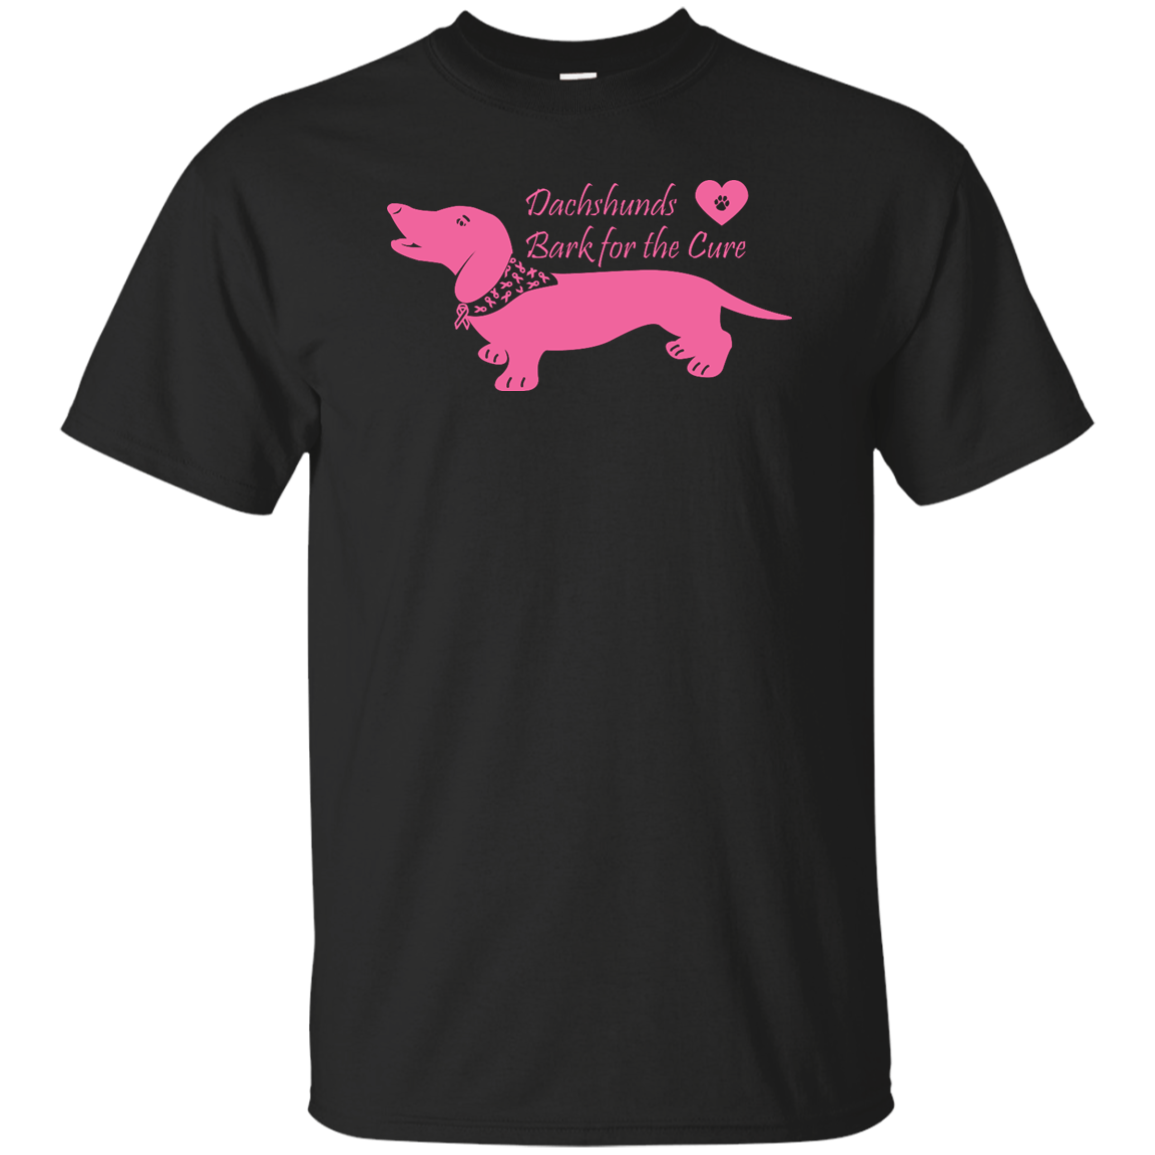 Dachshunds Bark for the Cure Shirts